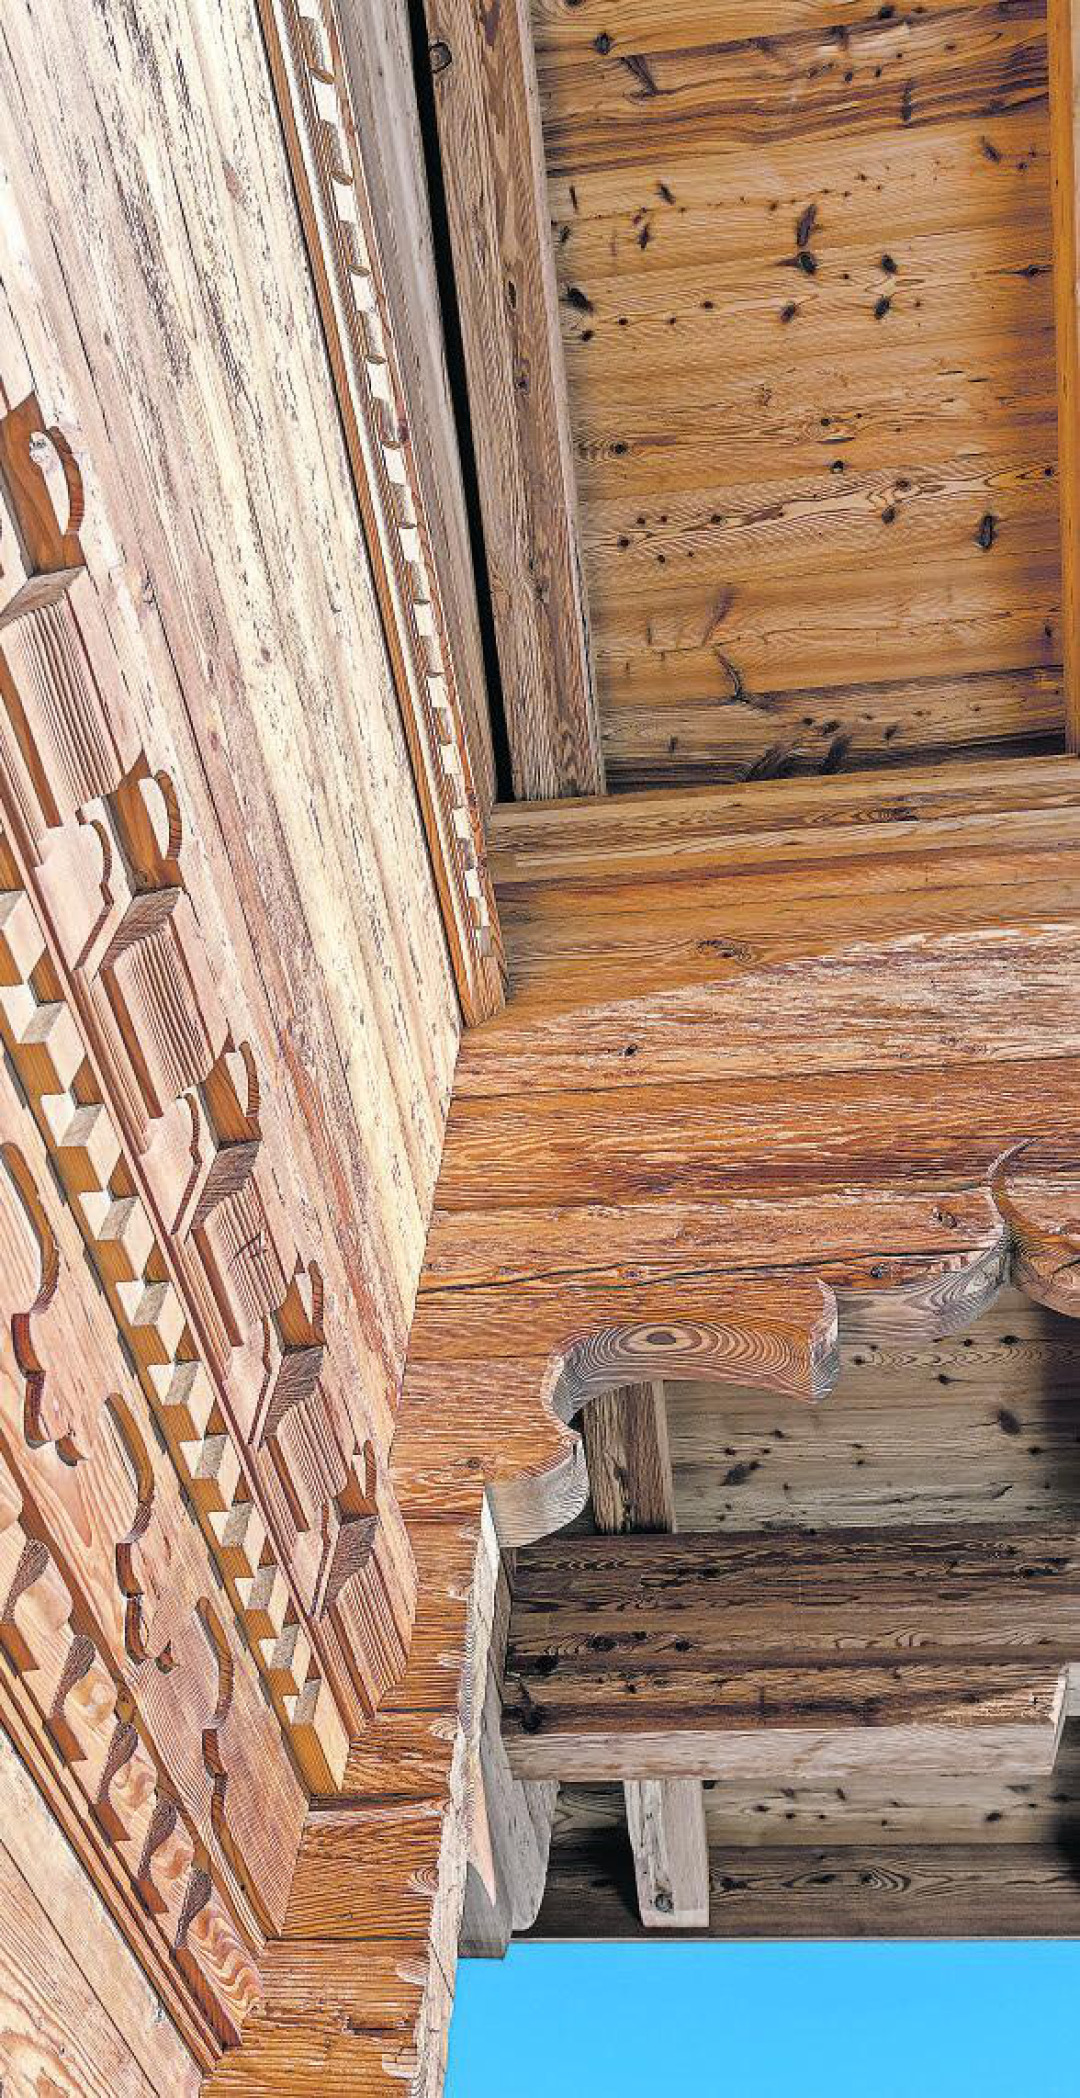 Chalet details: combining traditional skills with a modern approach | Photograph: Courtesy ARH.AG